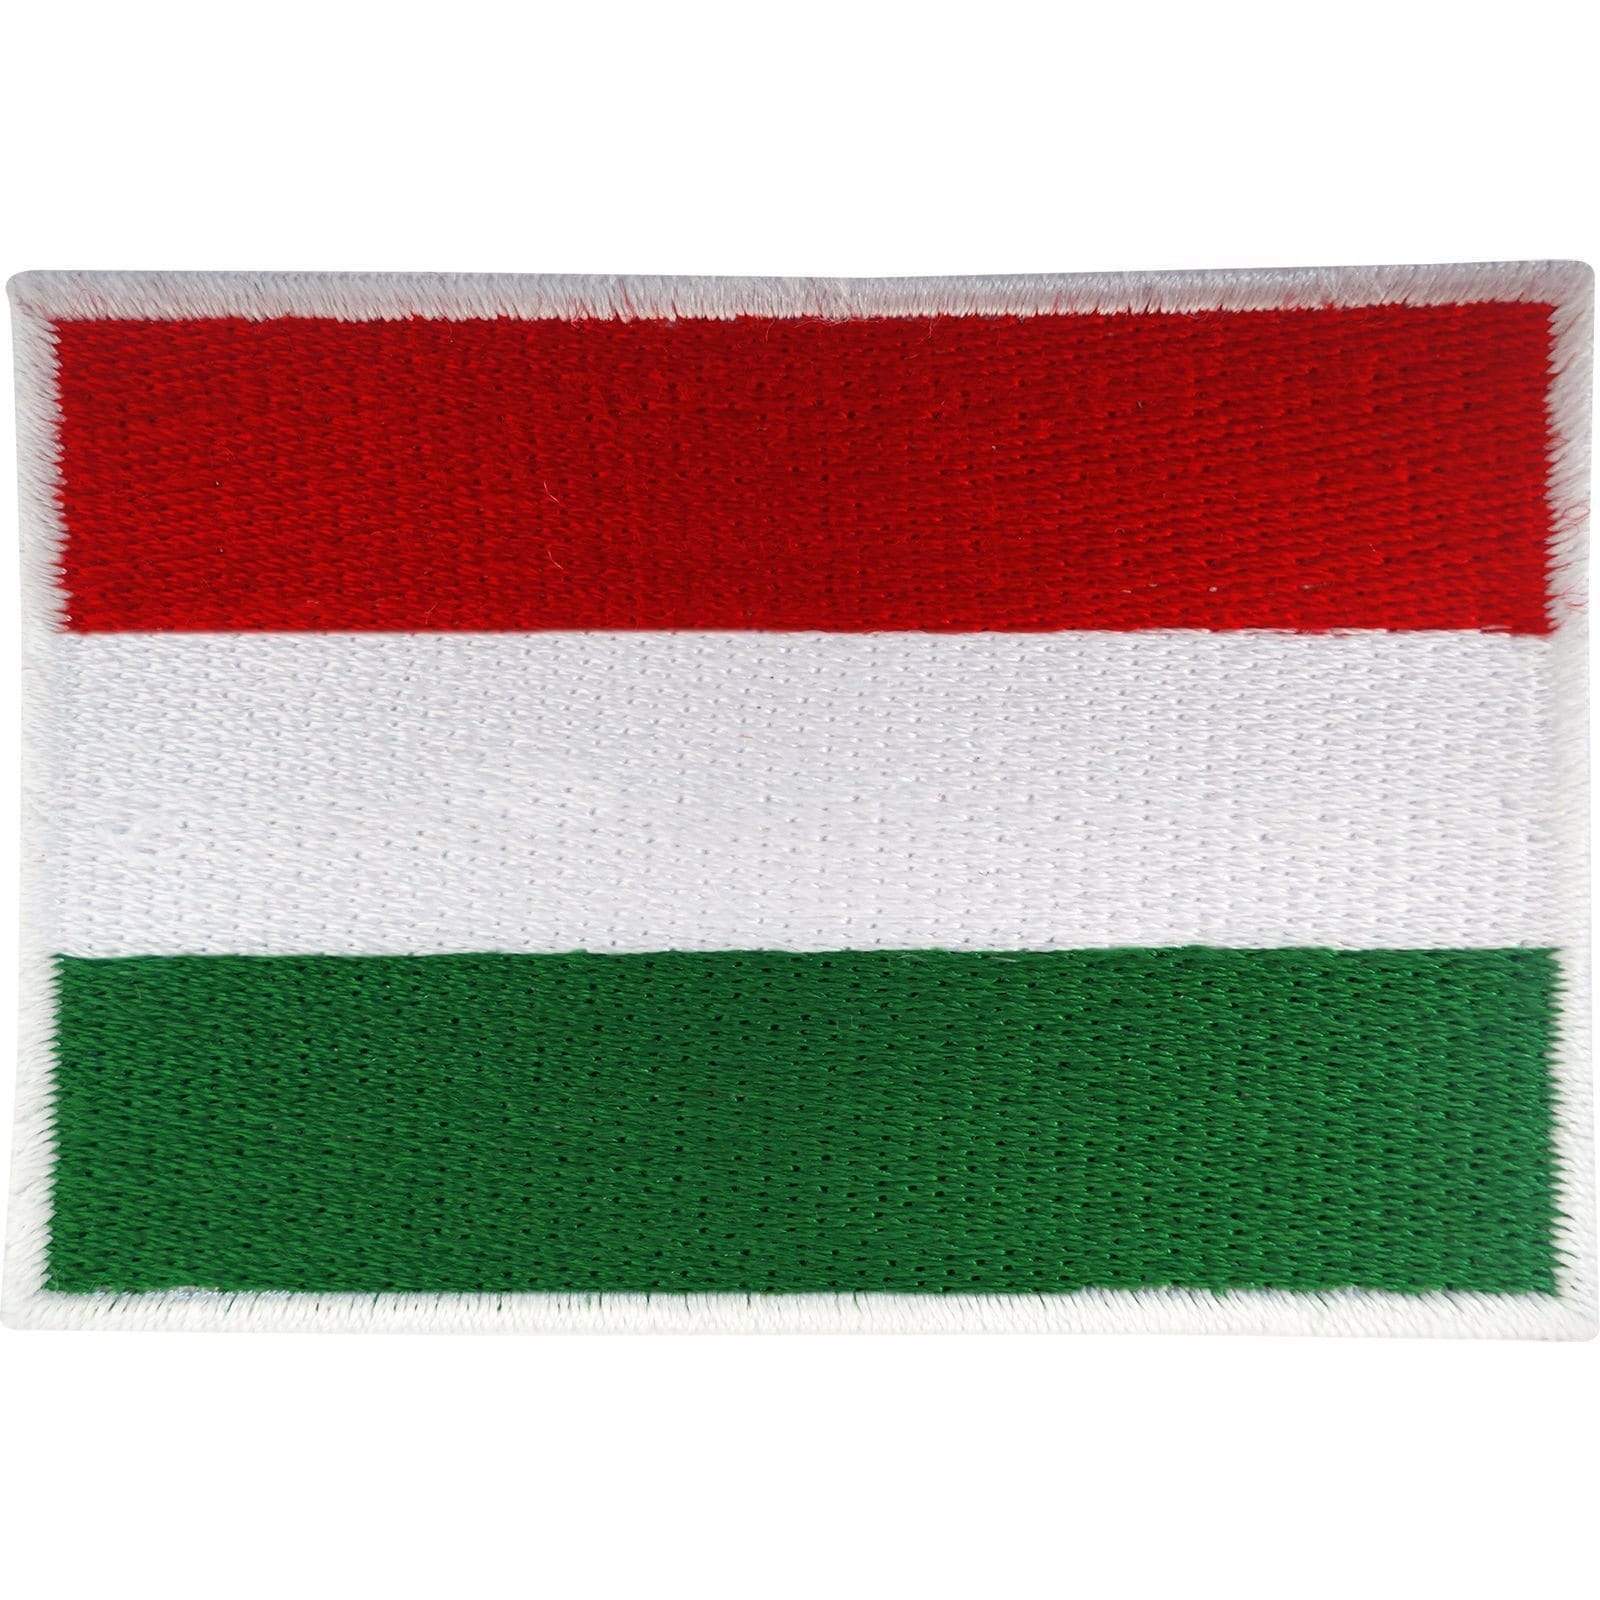 Hungary Flag Patch Iron On Badge / Sew On Hungarian Flag Embroidered Applique